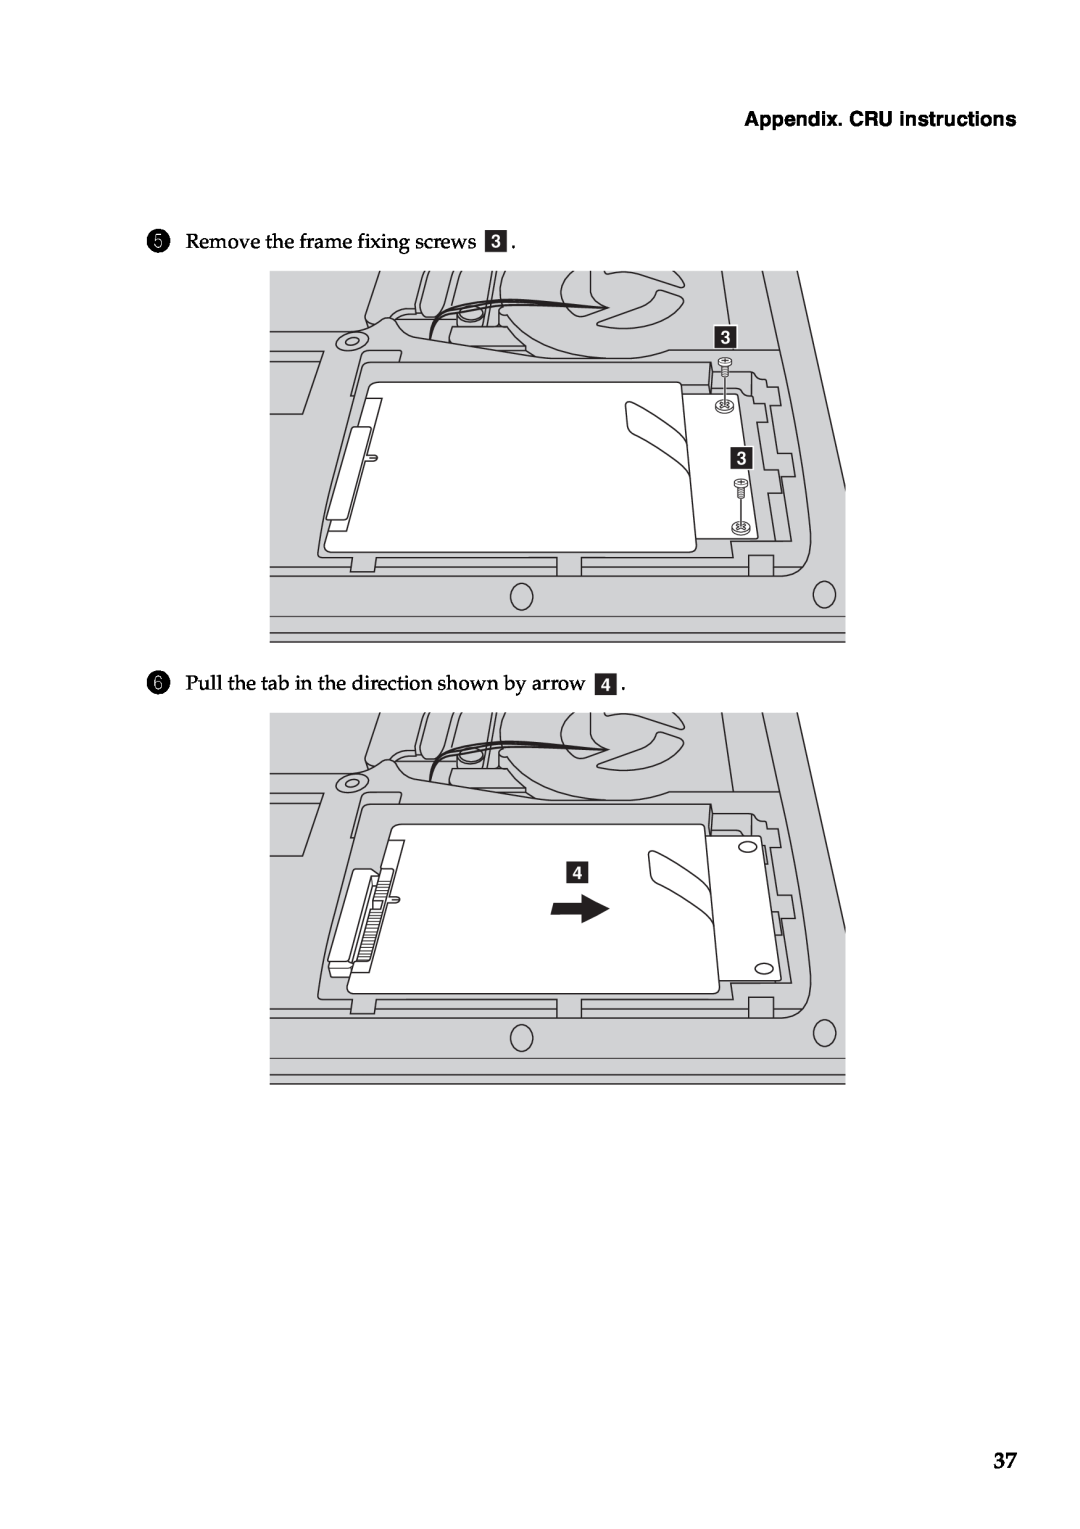 Lenovo Y471A Appendix. CRU instructions, Remove the frame fixing screws c, Pull the tab in the direction shown by arrow d 